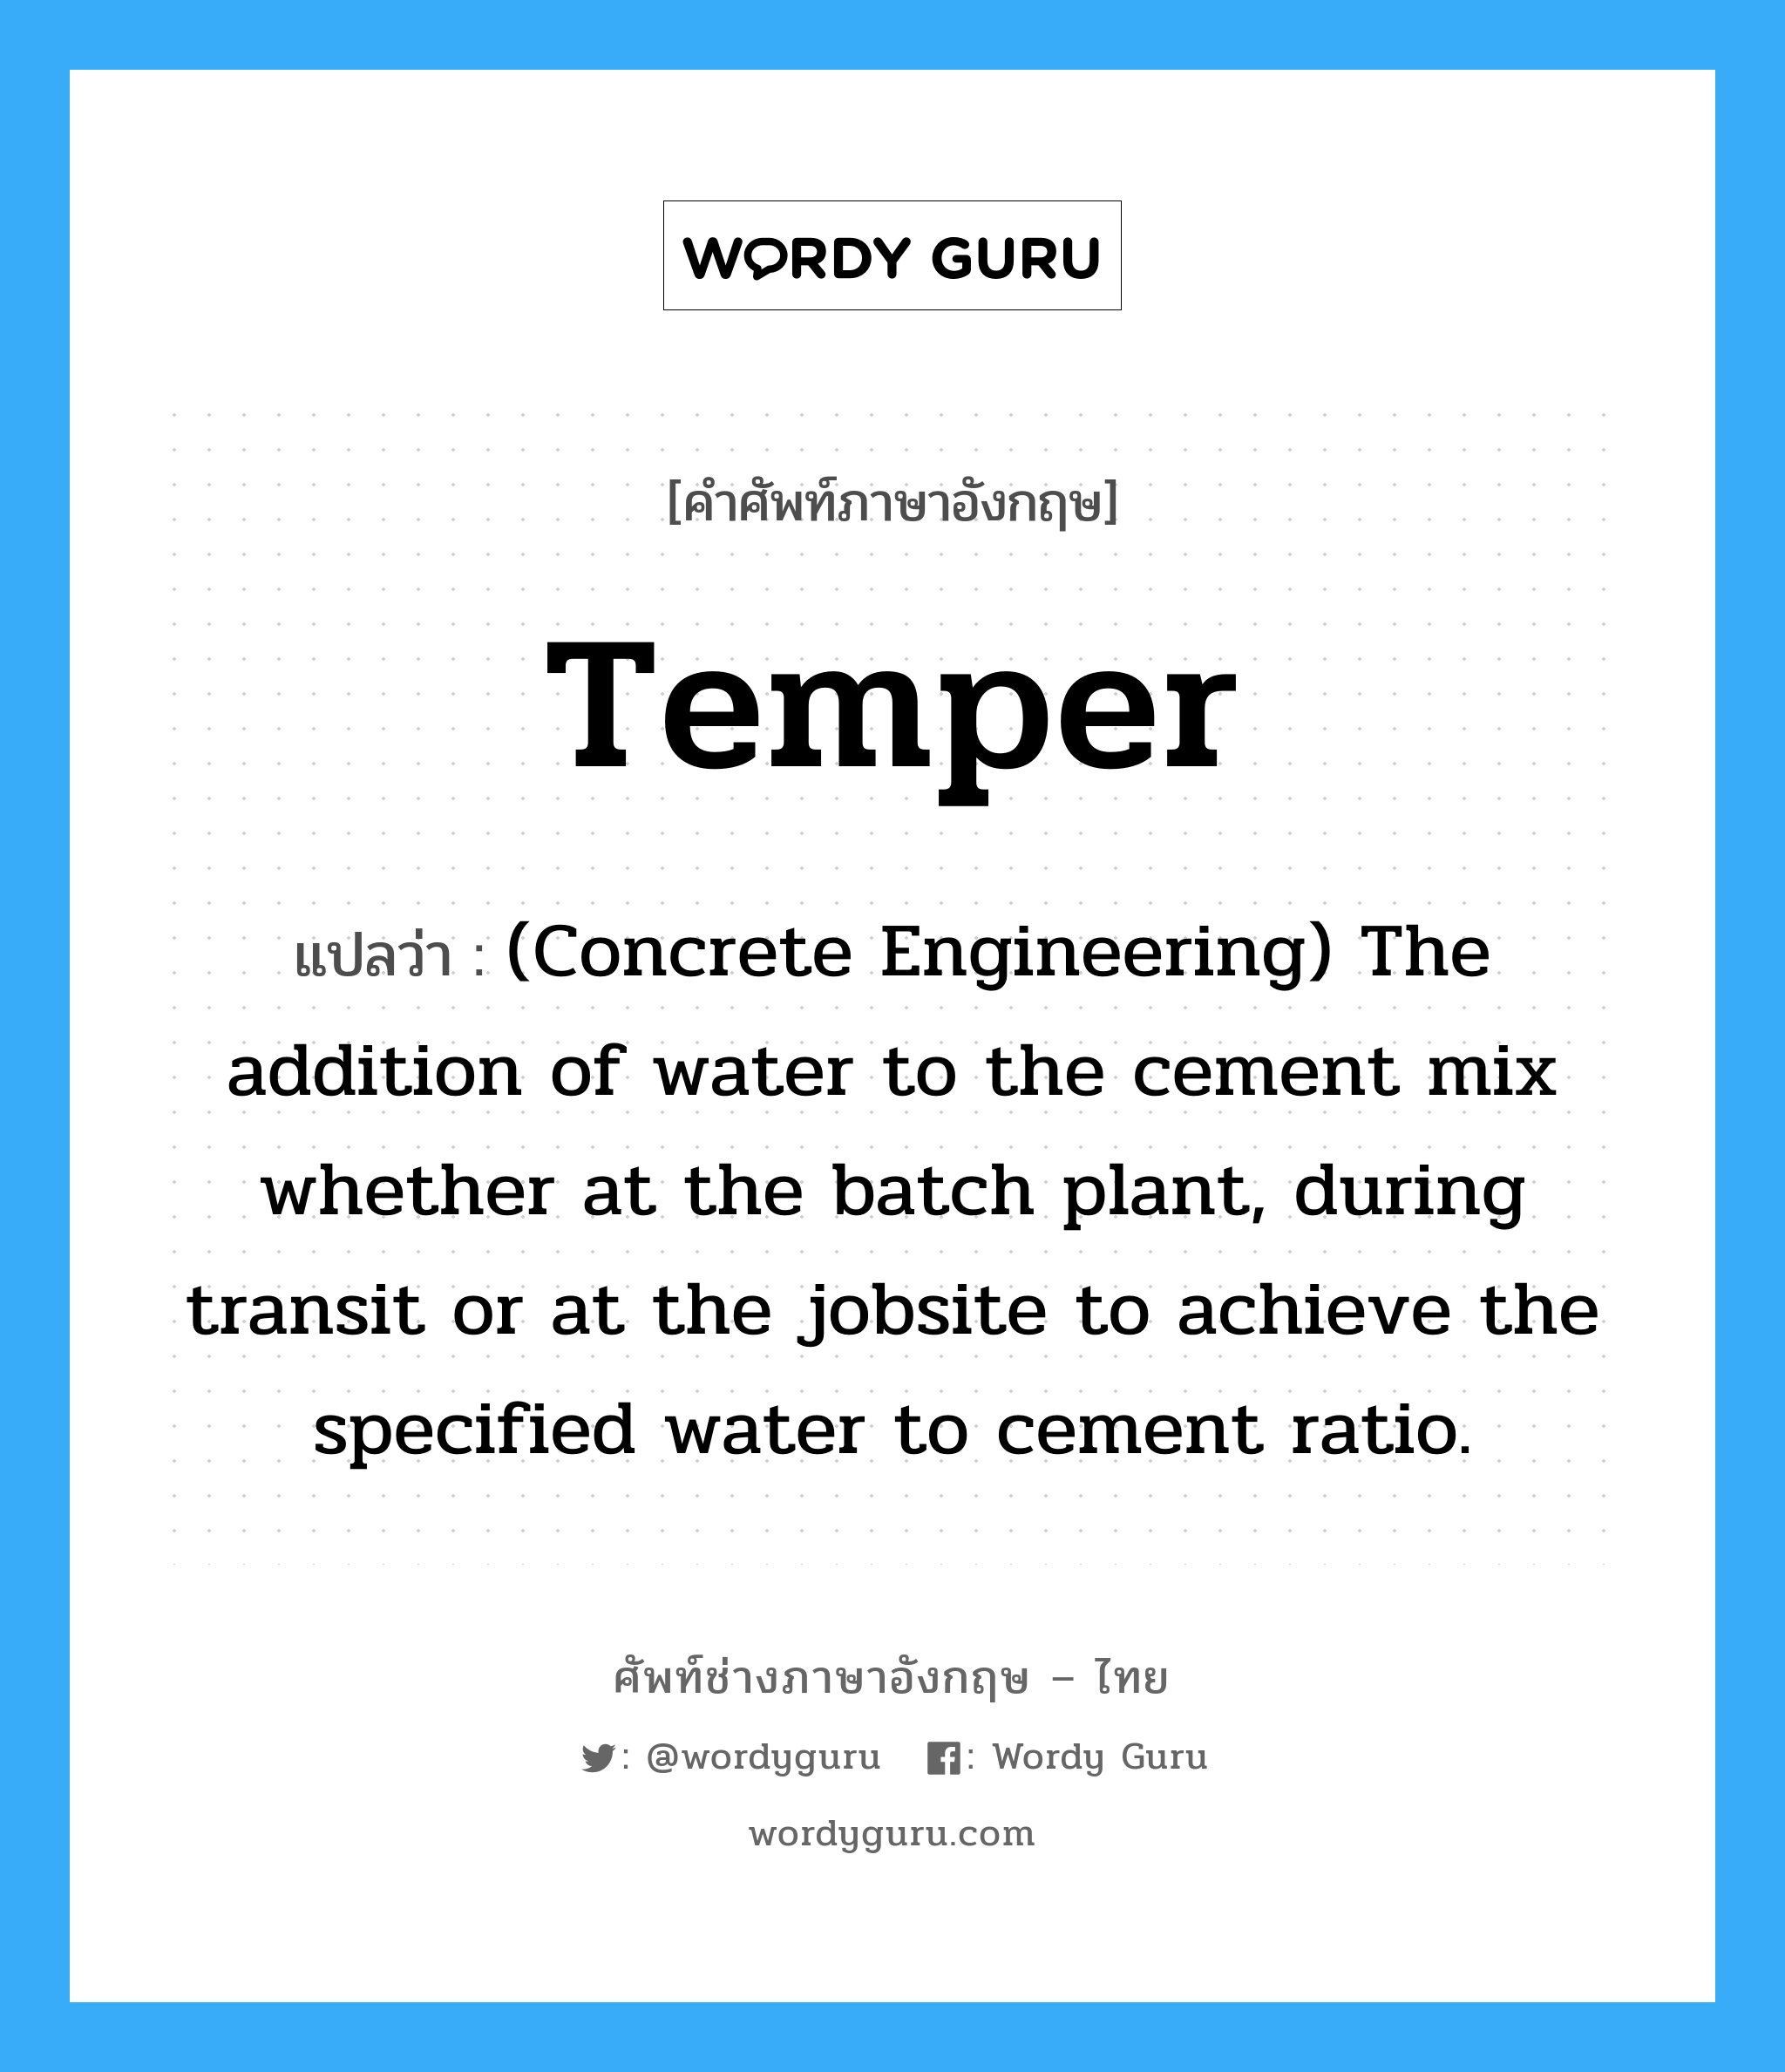 Temper แปลว่า?, คำศัพท์ช่างภาษาอังกฤษ - ไทย Temper คำศัพท์ภาษาอังกฤษ Temper แปลว่า (Concrete Engineering) The addition of water to the cement mix whether at the batch plant, during transit or at the jobsite to achieve the specified water to cement ratio.